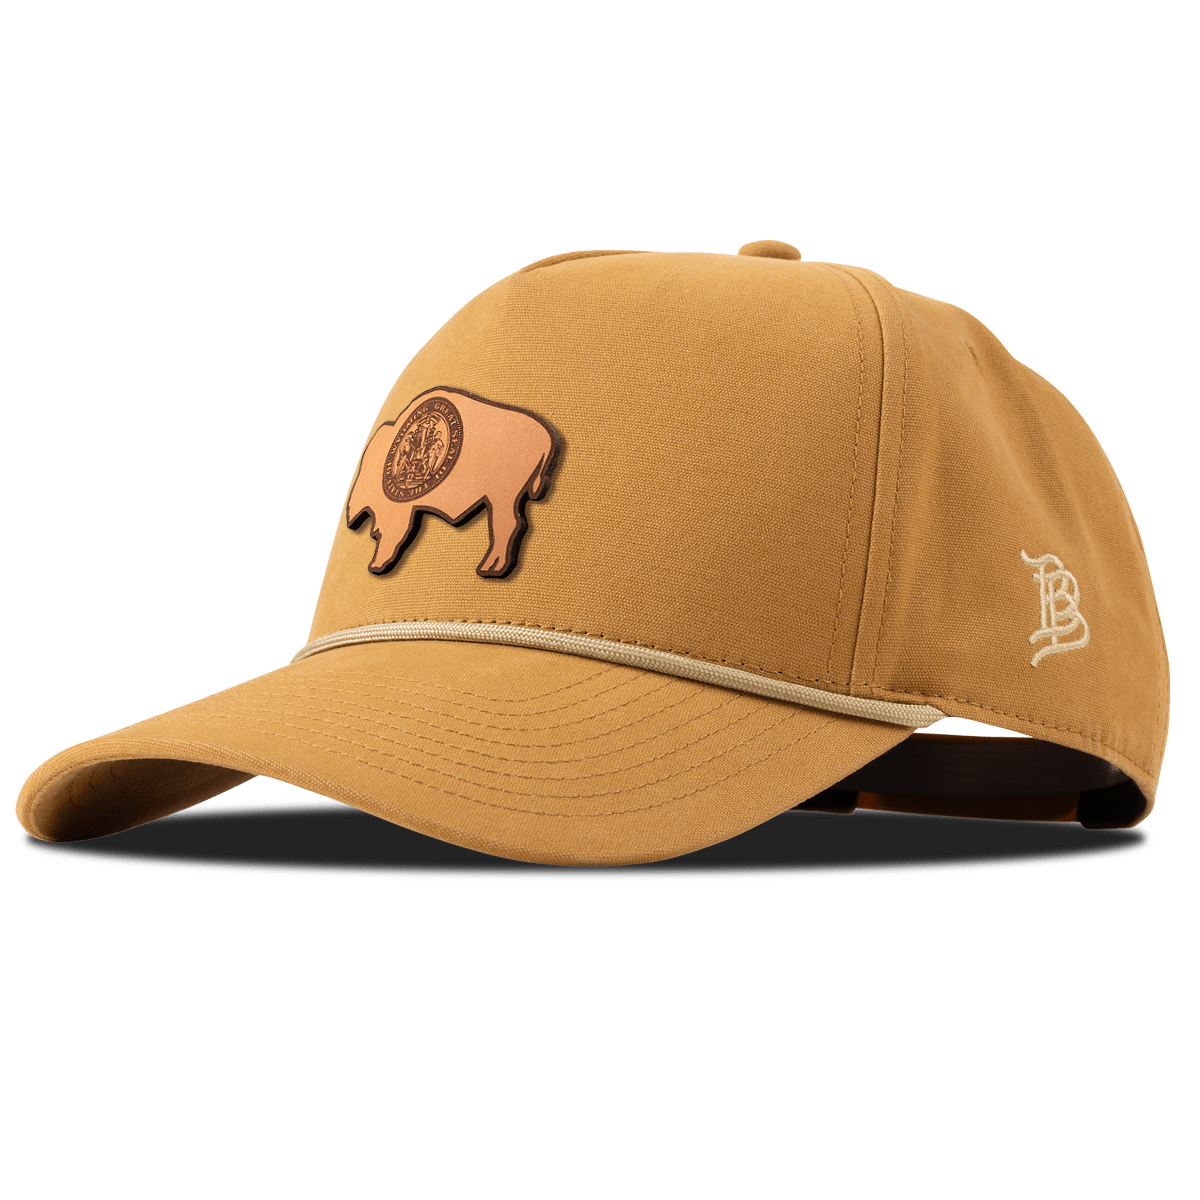 Wyoming 44 Canvas 5 Panel Rope Wheat